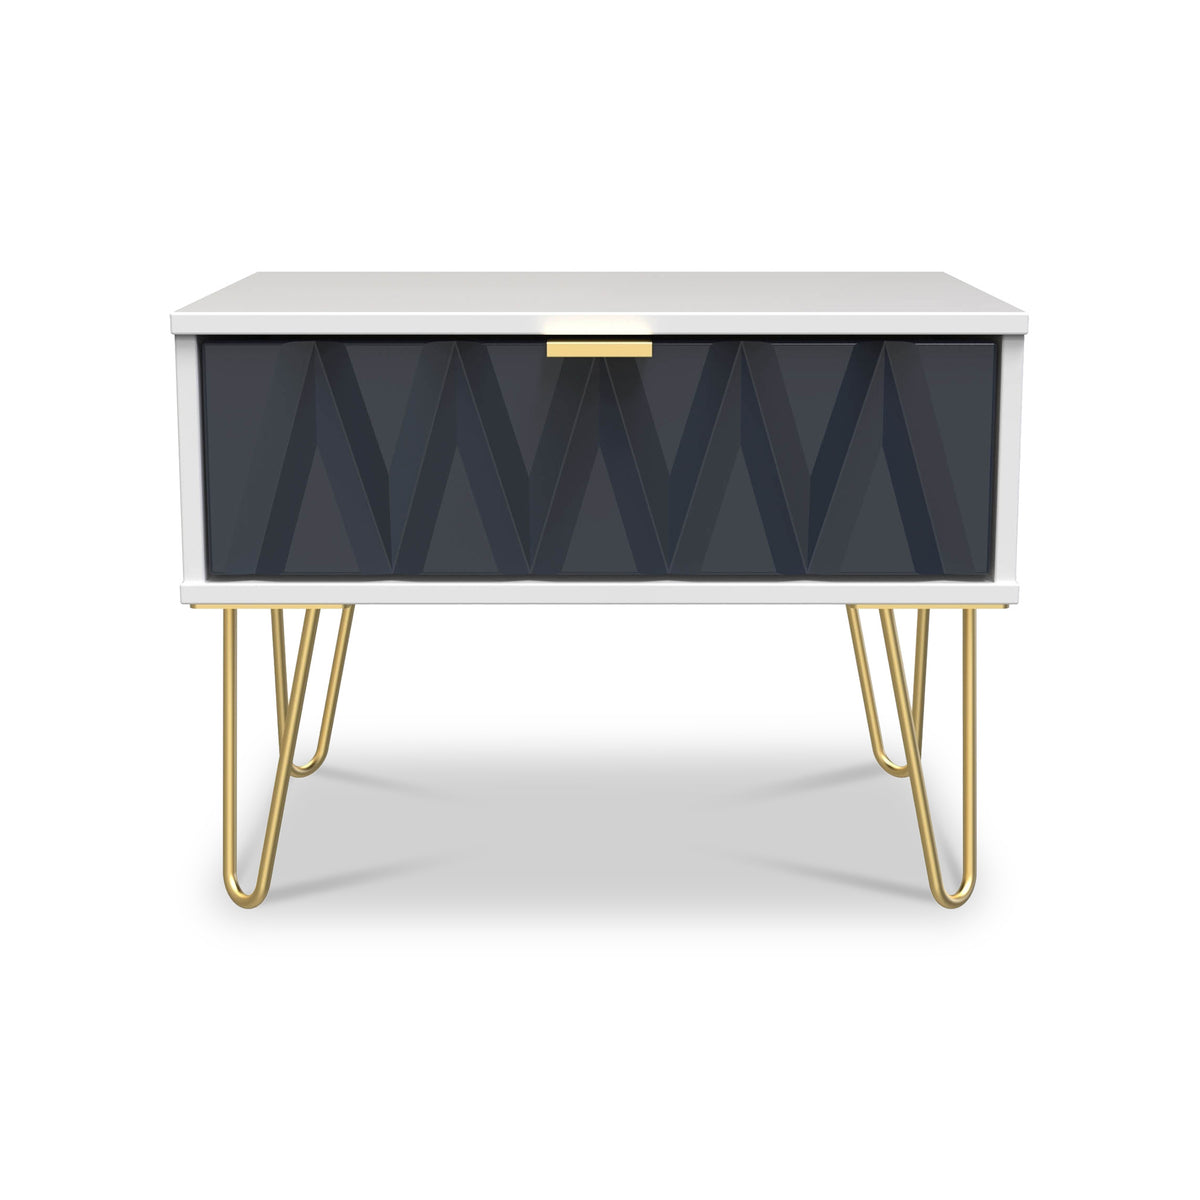 Geo 1 Drawer Side Table in Navy by Roseland Furniture